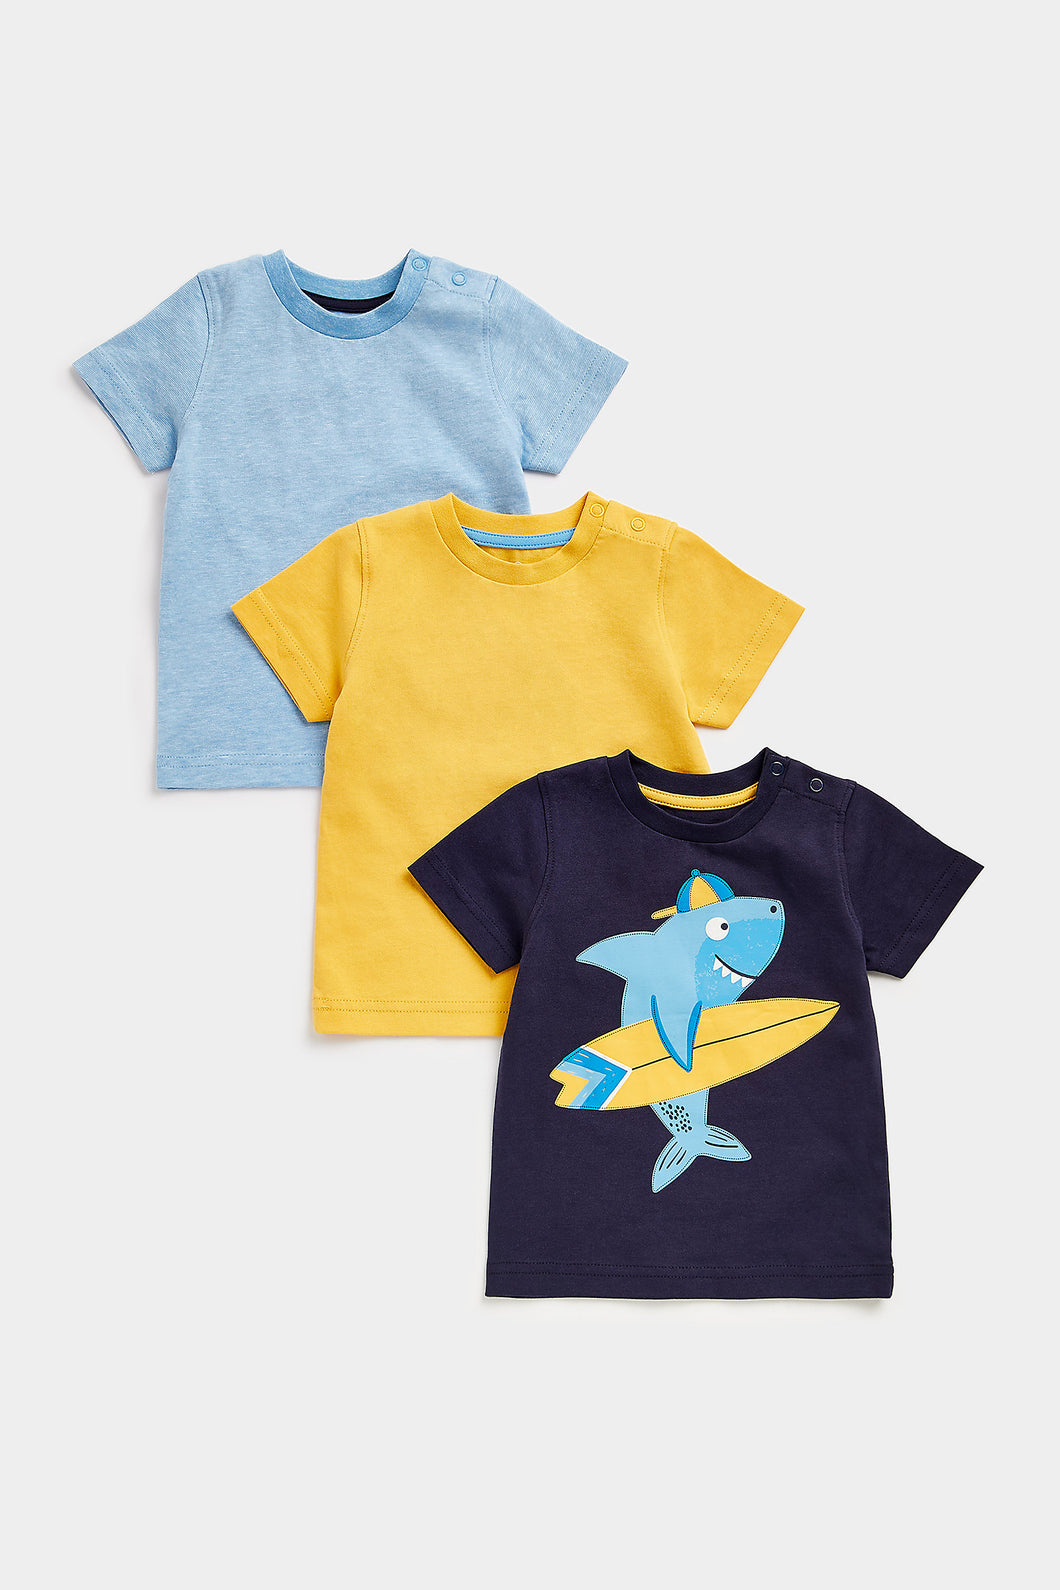 Mothercare Surf Shark T-Shirts - 3 Pack